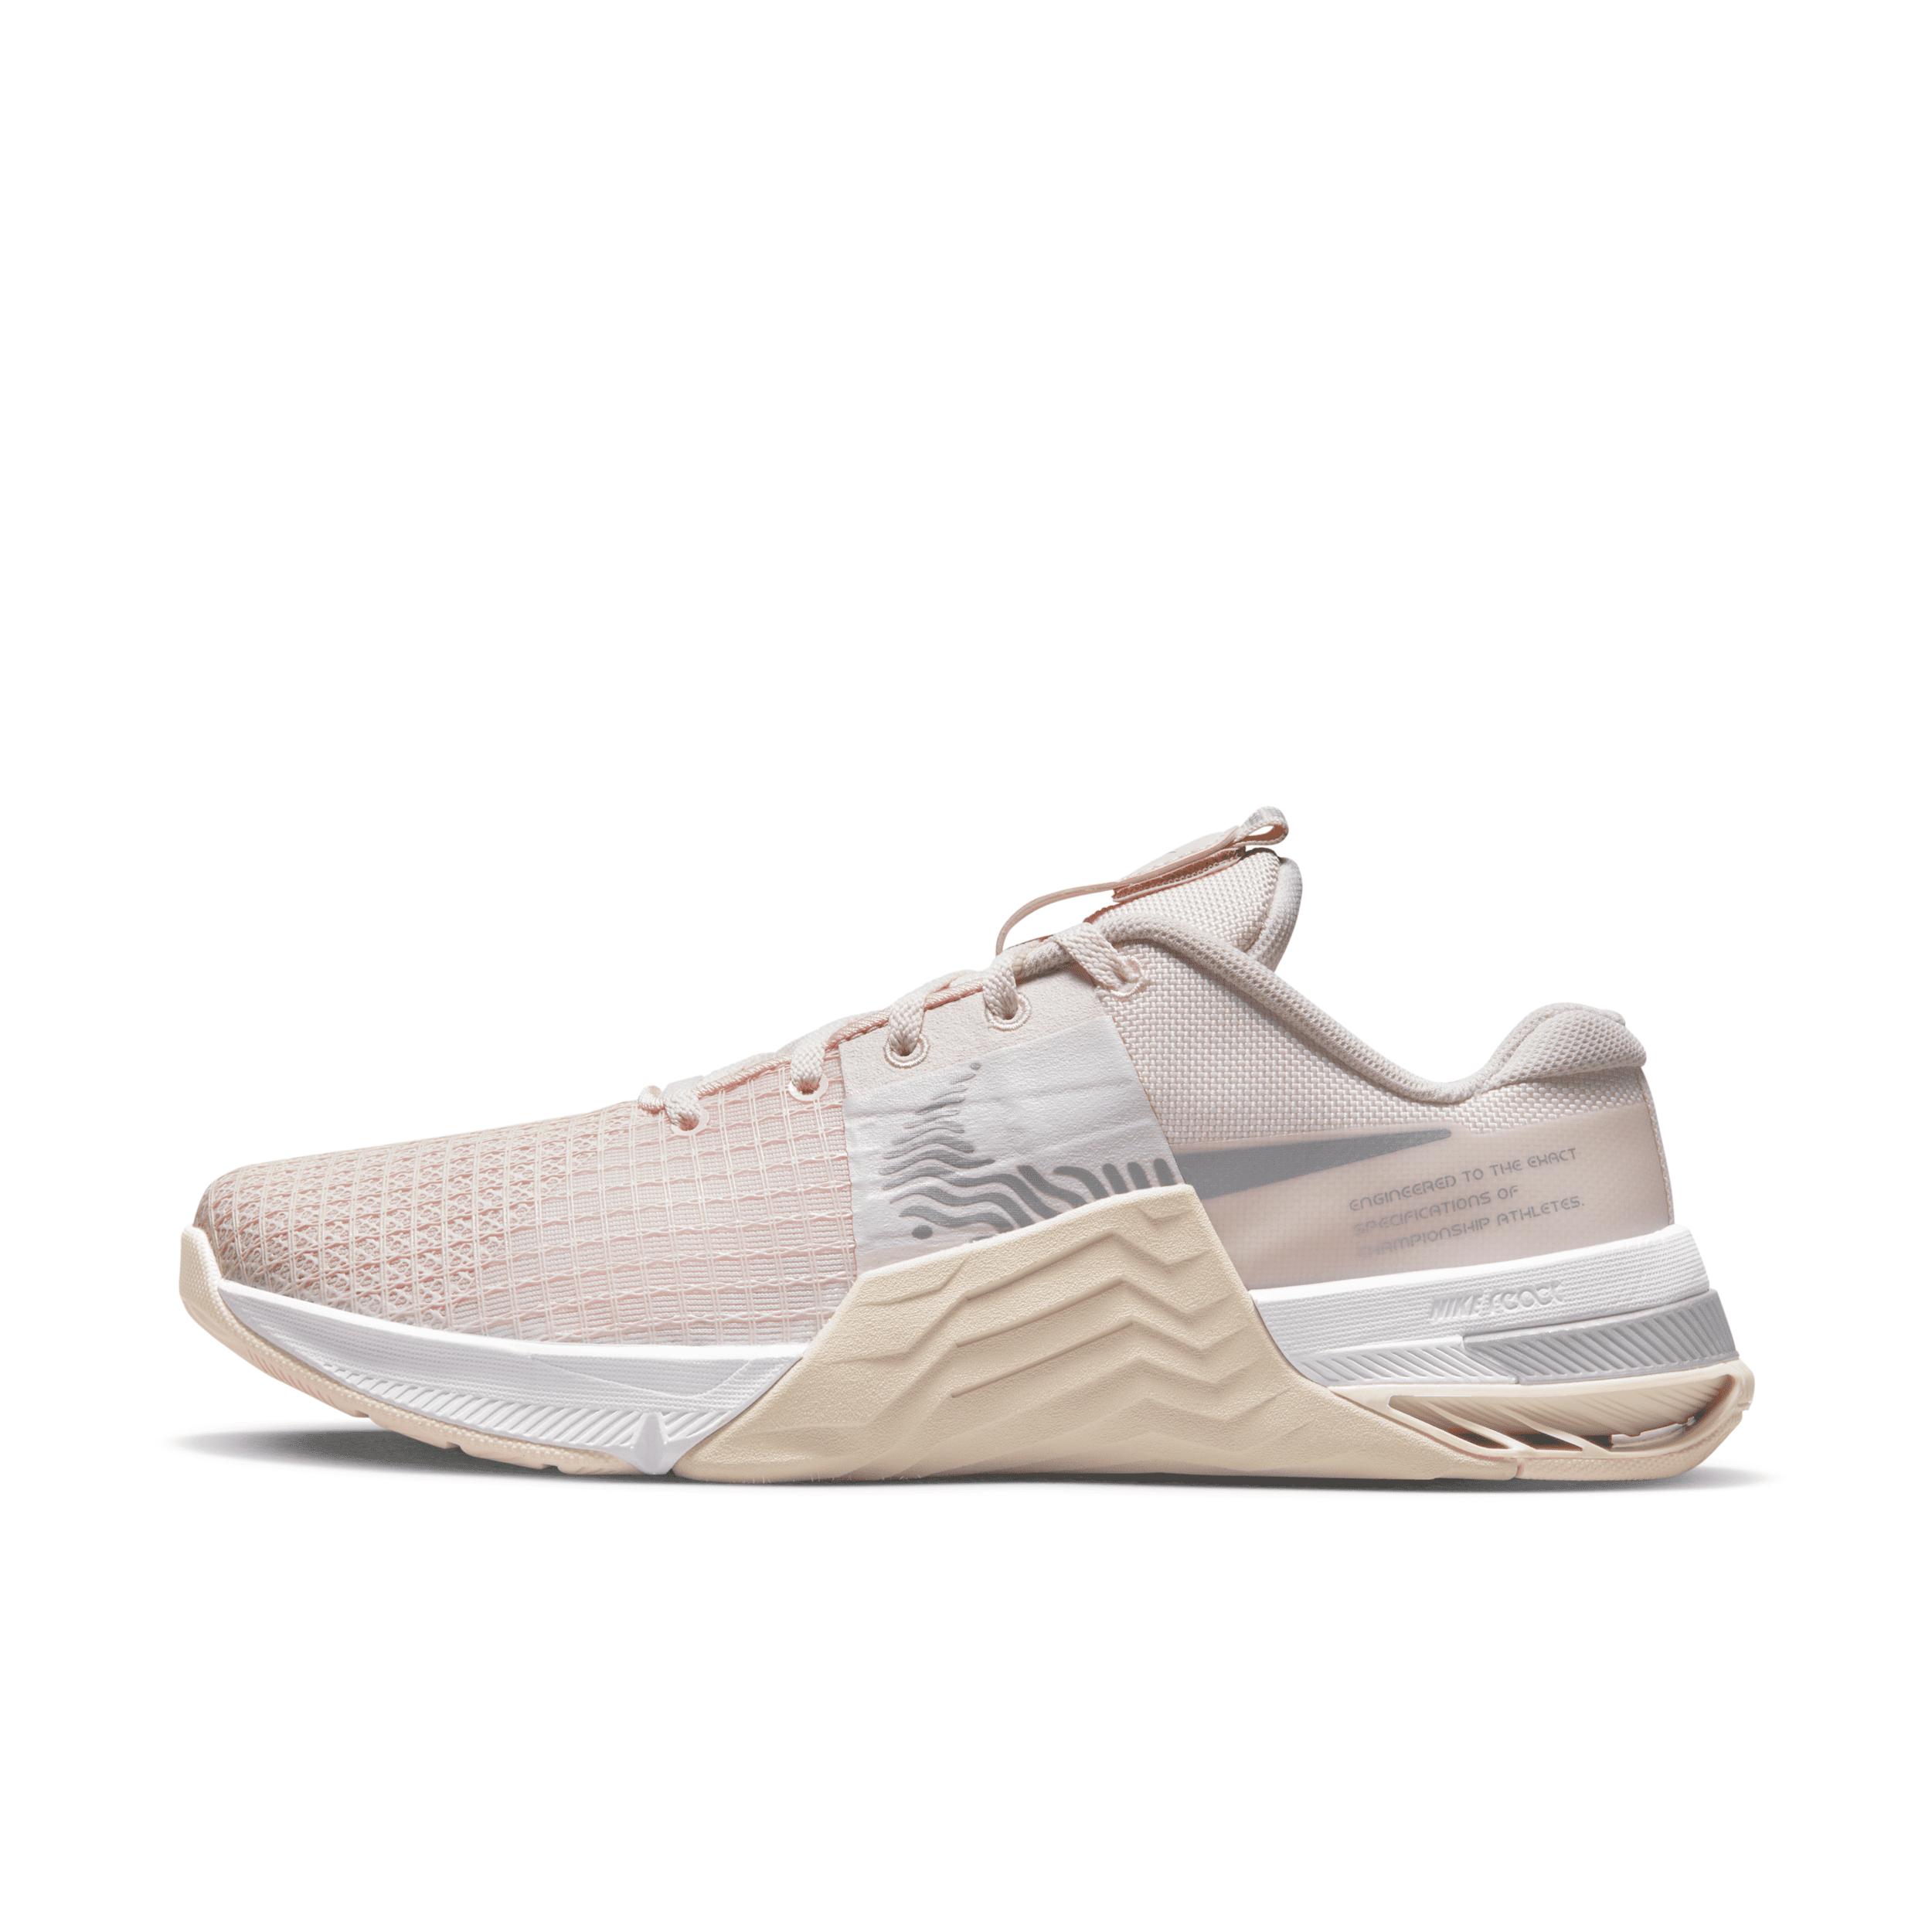 Nike Metcon 8 Training Shoes In Pink, in White | Lyst